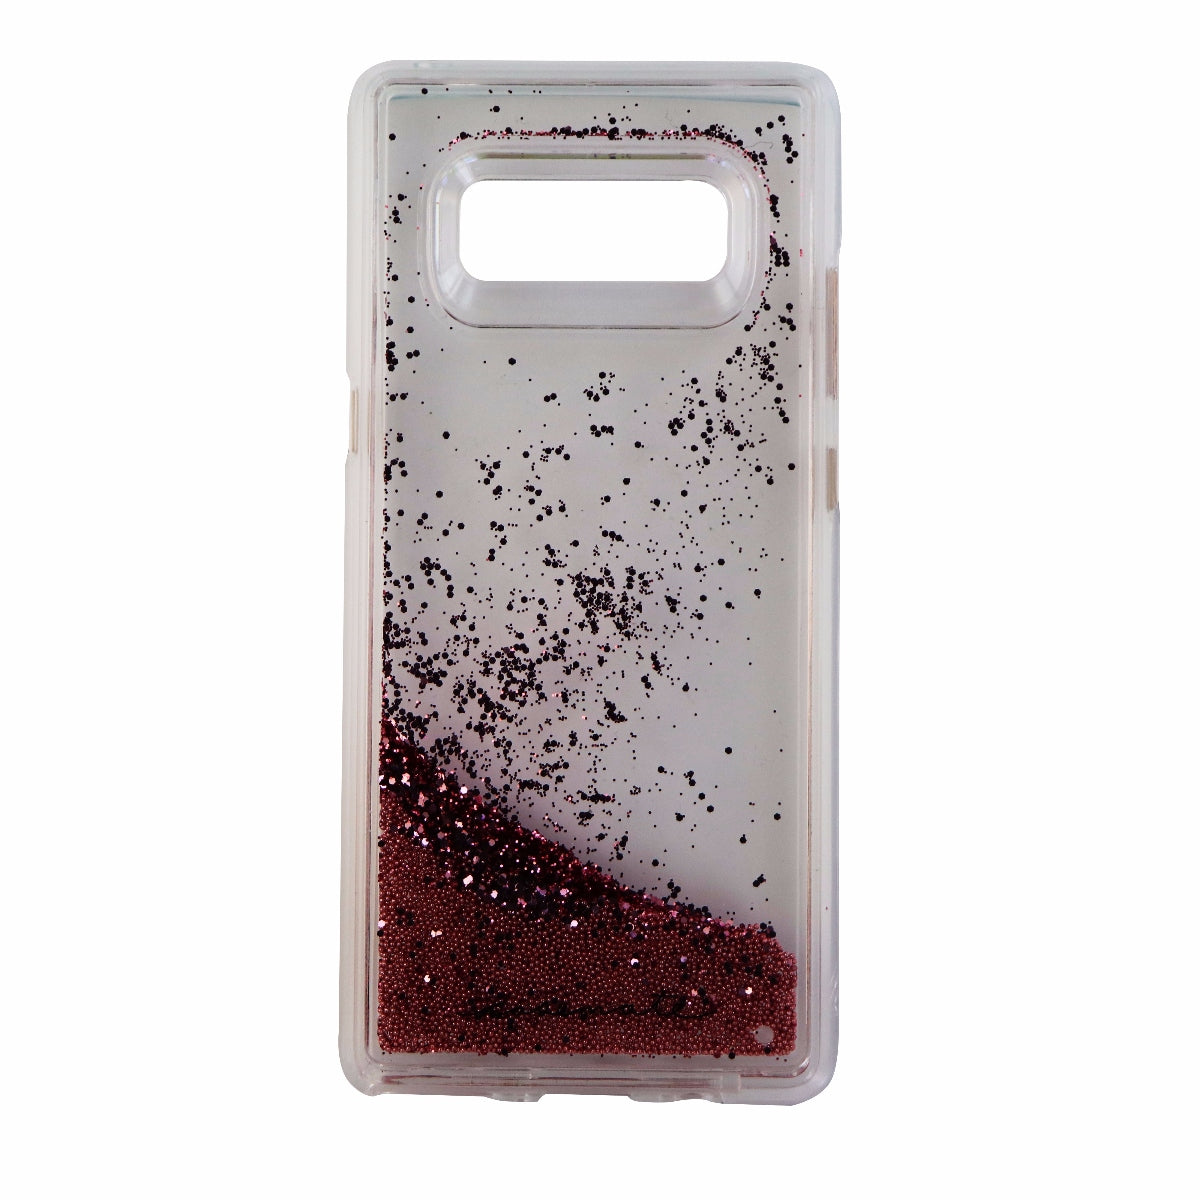 Case-Mate Liquid Glitter Waterfall Case for Samsung Galaxy Note 8 - Pink Glitter Cell Phone - Cases, Covers & Skins Case-Mate    - Simple Cell Bulk Wholesale Pricing - USA Seller